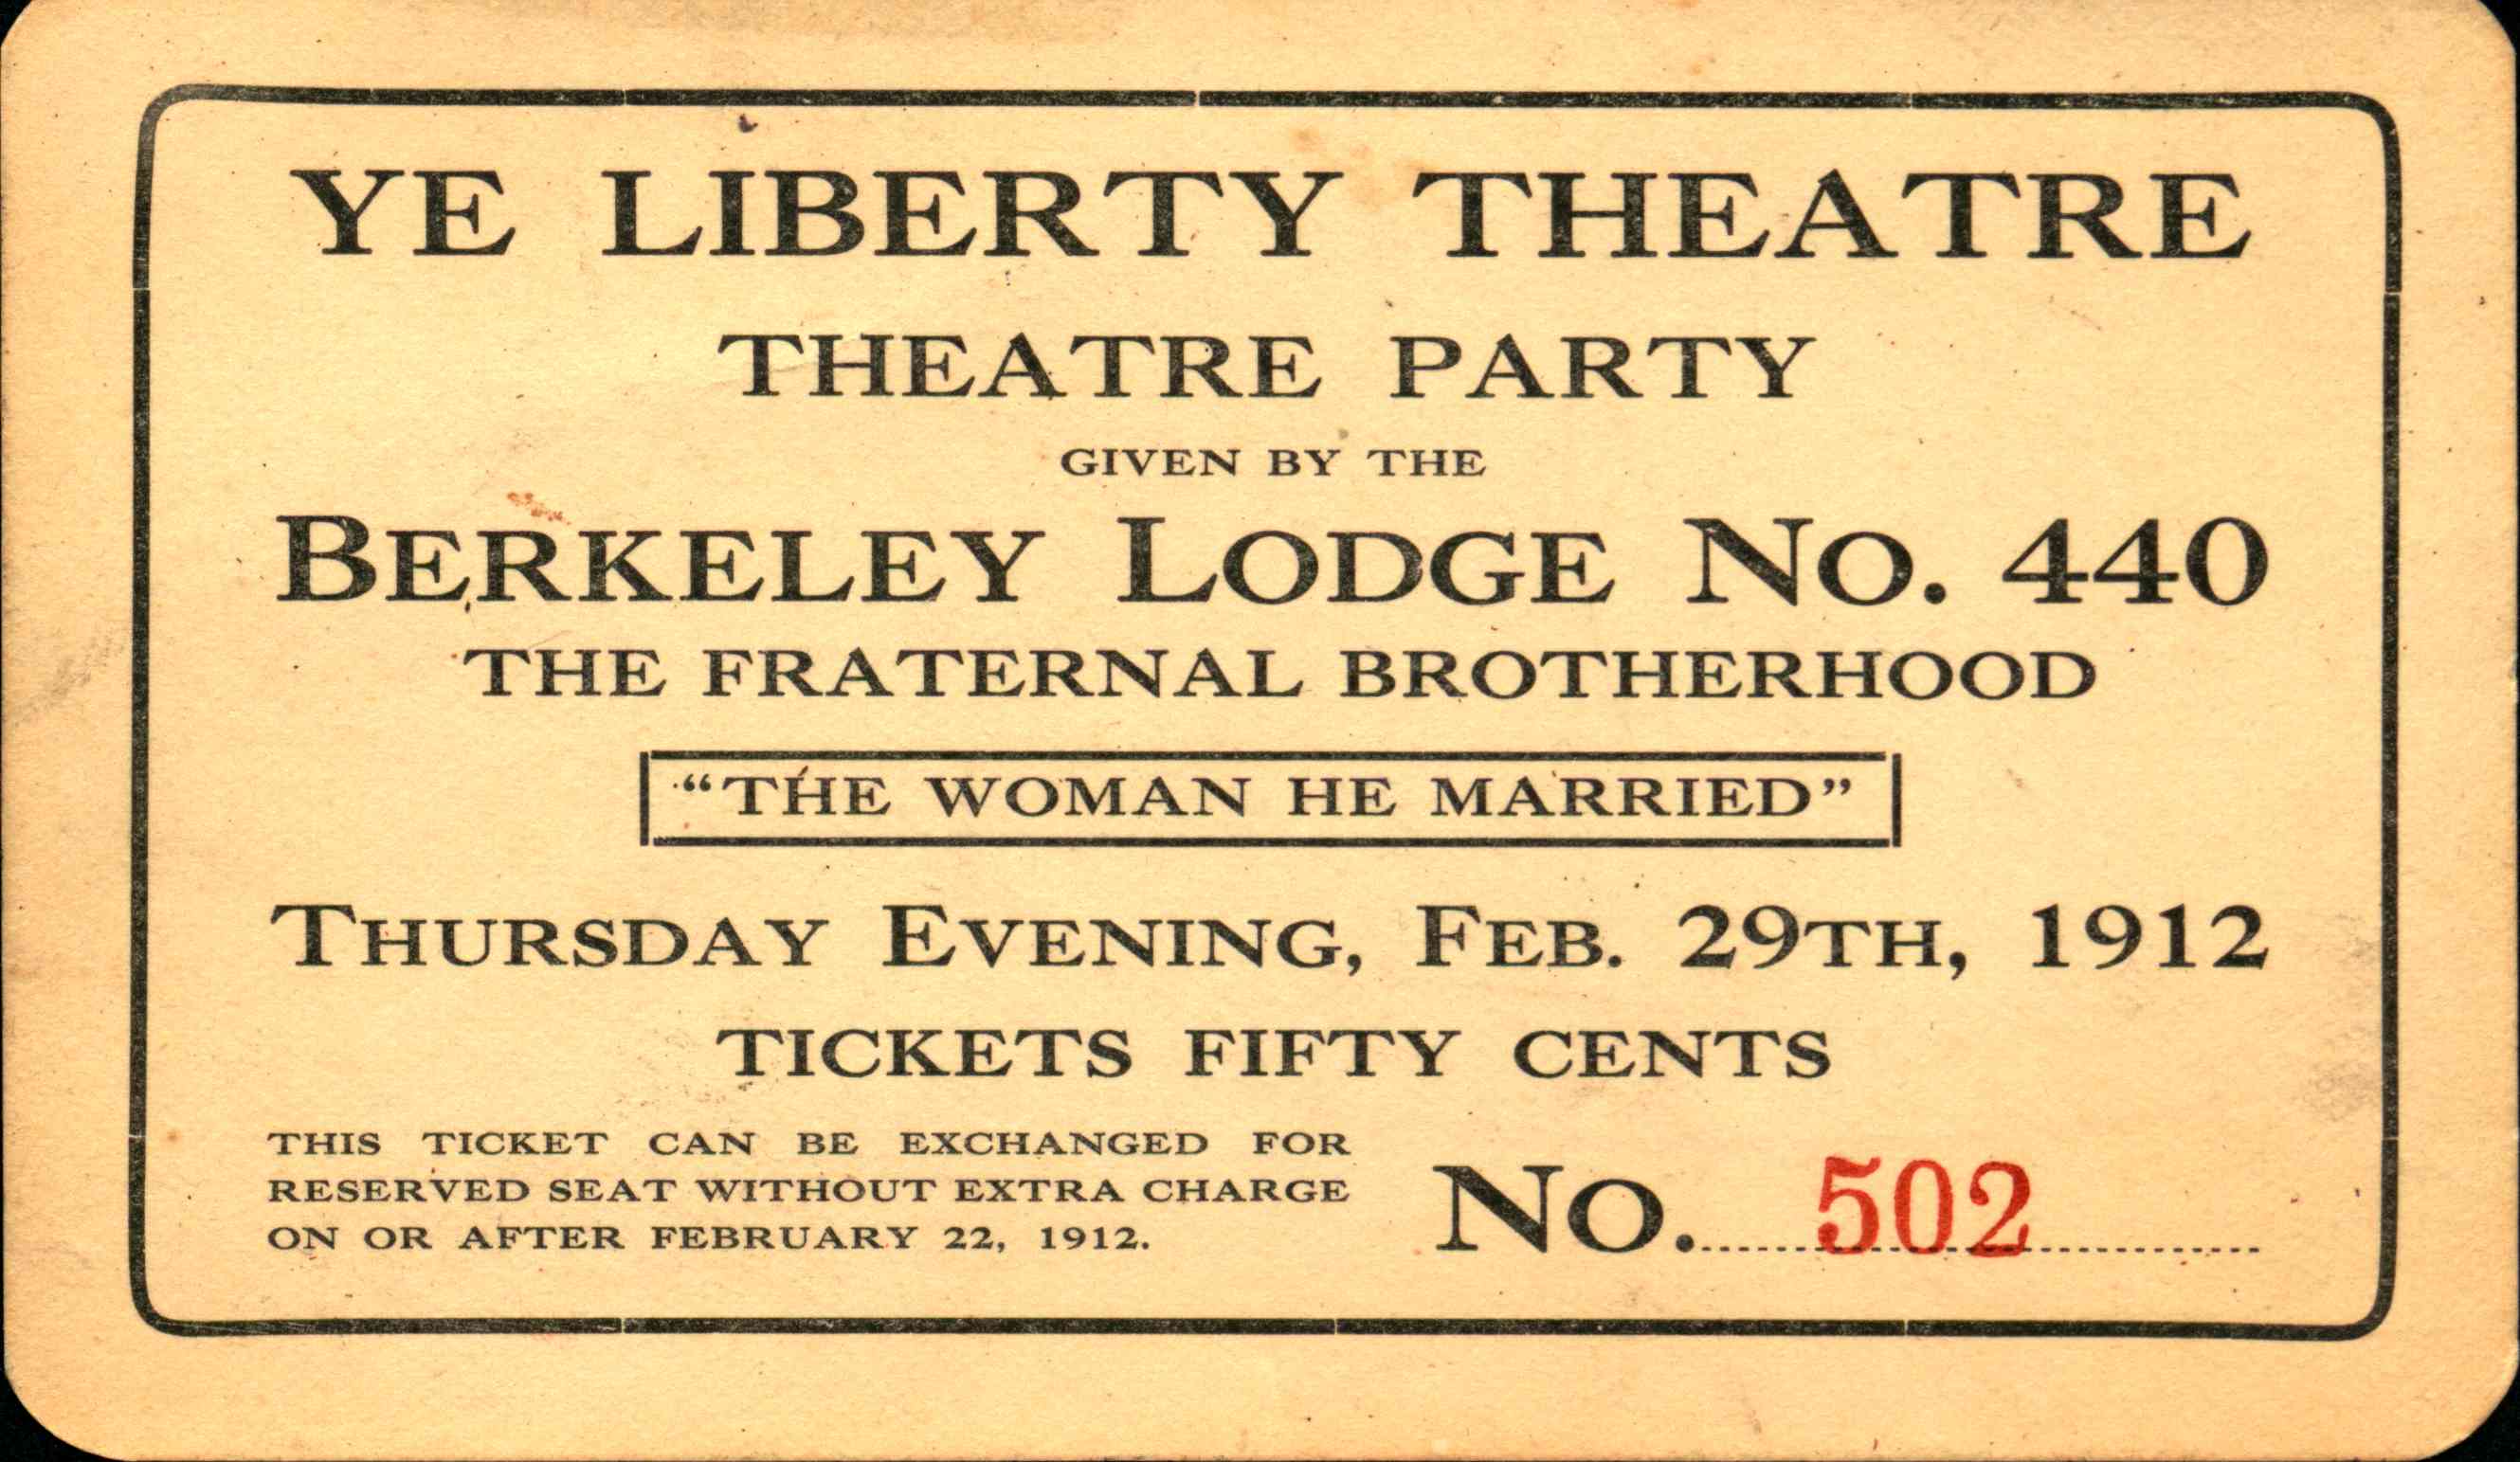 Ticket shows play information